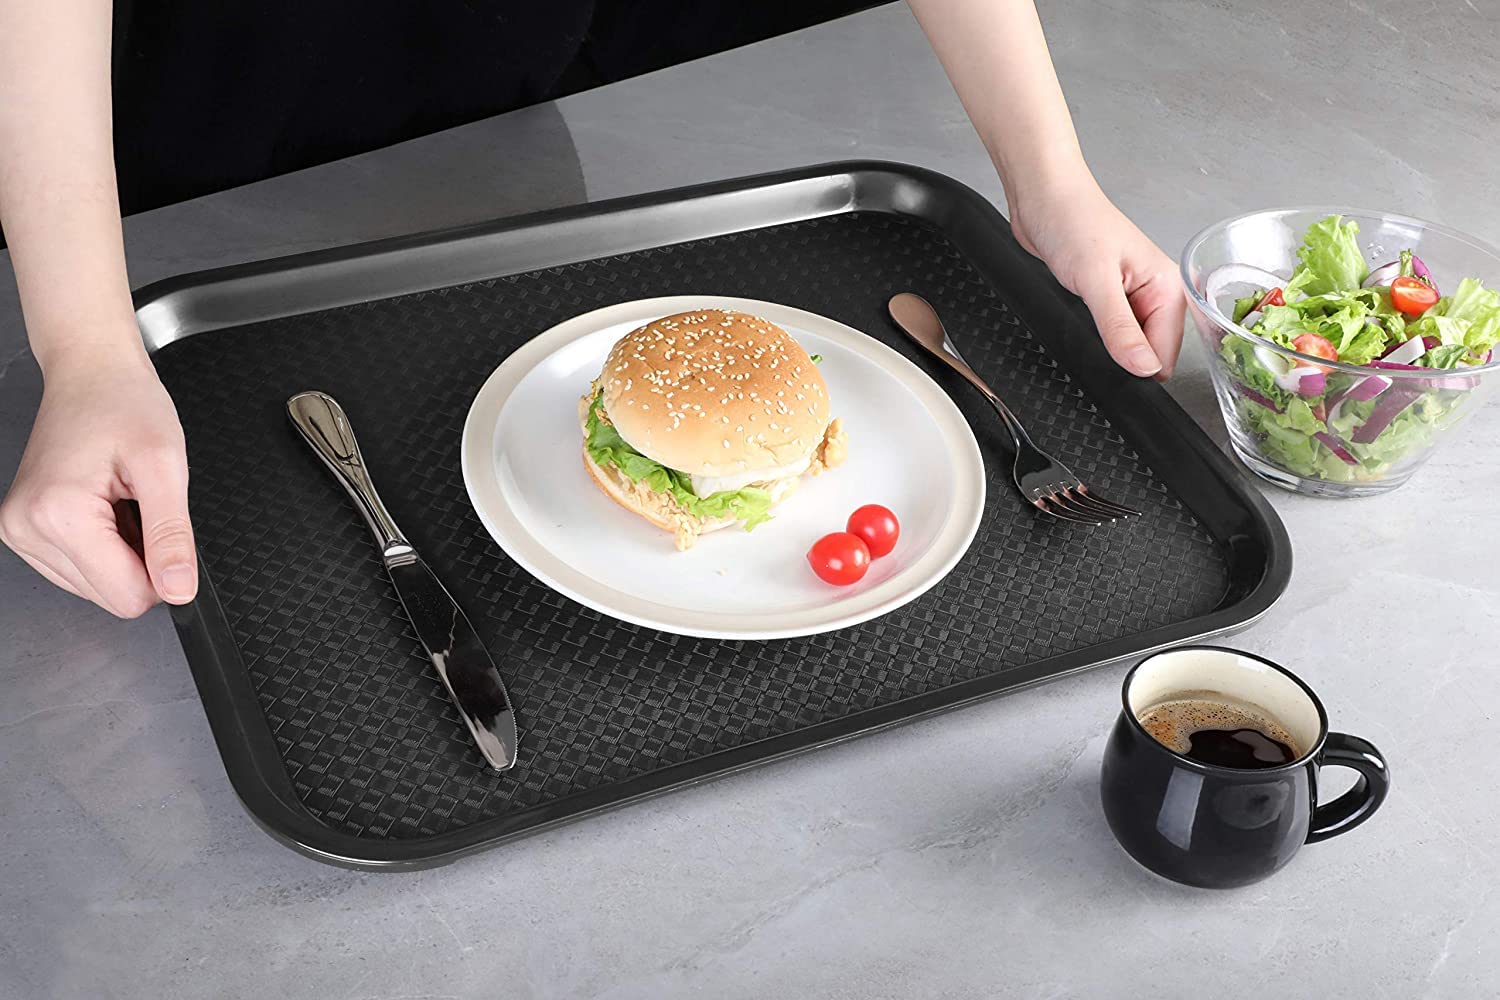 NJ Plastic Serving Platter Large Tray Unbreakable Snacks Tea Serving Tray Black Drink Breakfast Tea Dinner Coffee Salad Food for Dinning Table Home Kitchen (16 X 12 Inches) : 4 Pcs.